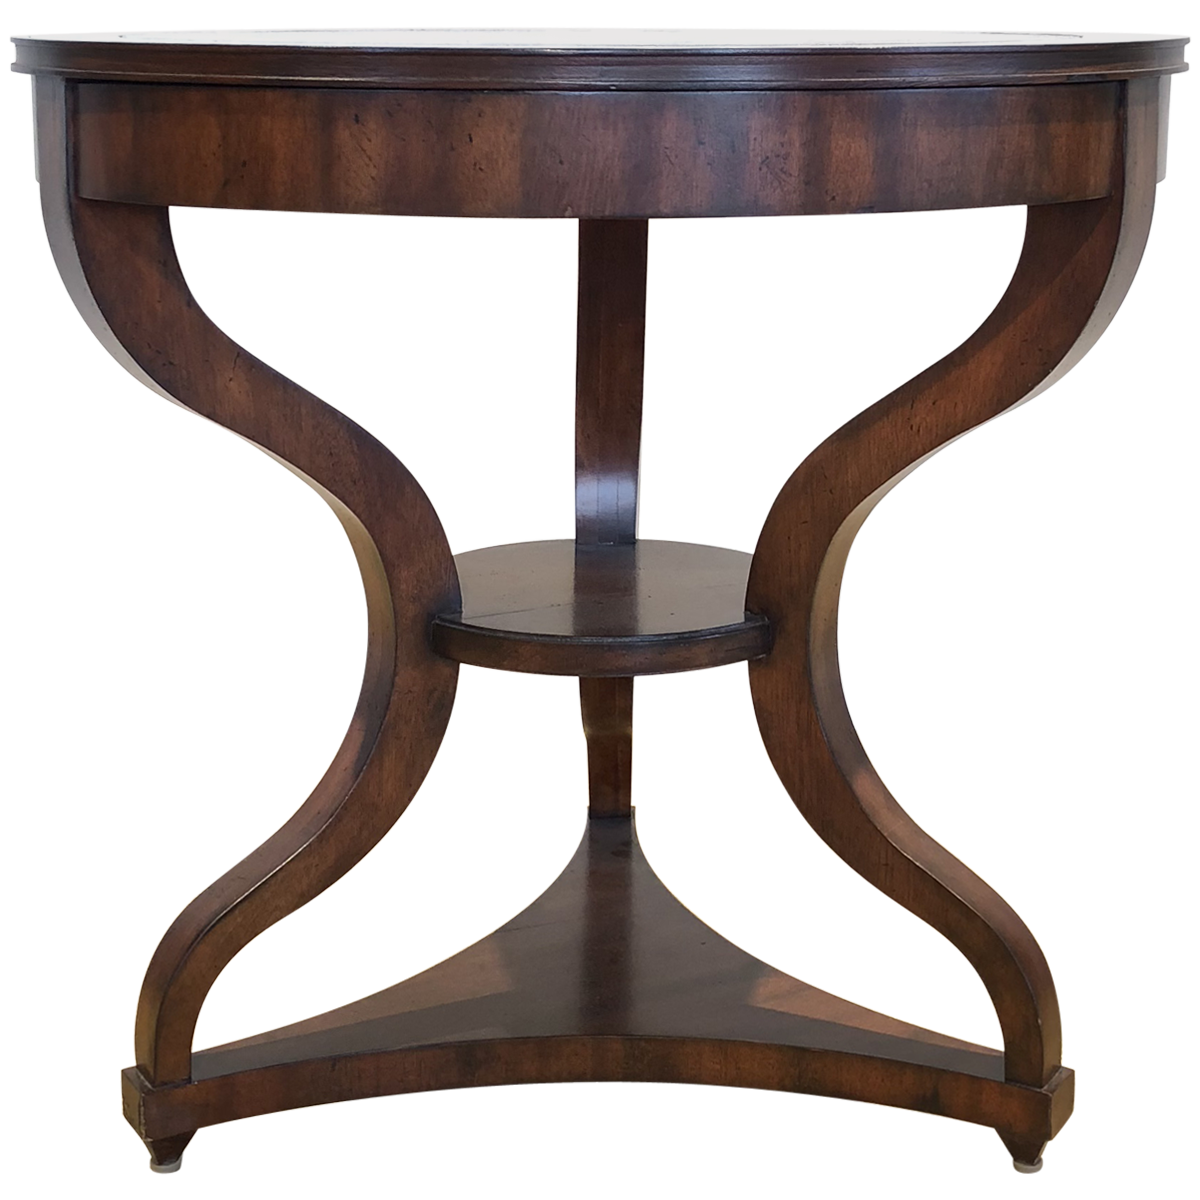 End Table Download Free HQ Image PNG Image